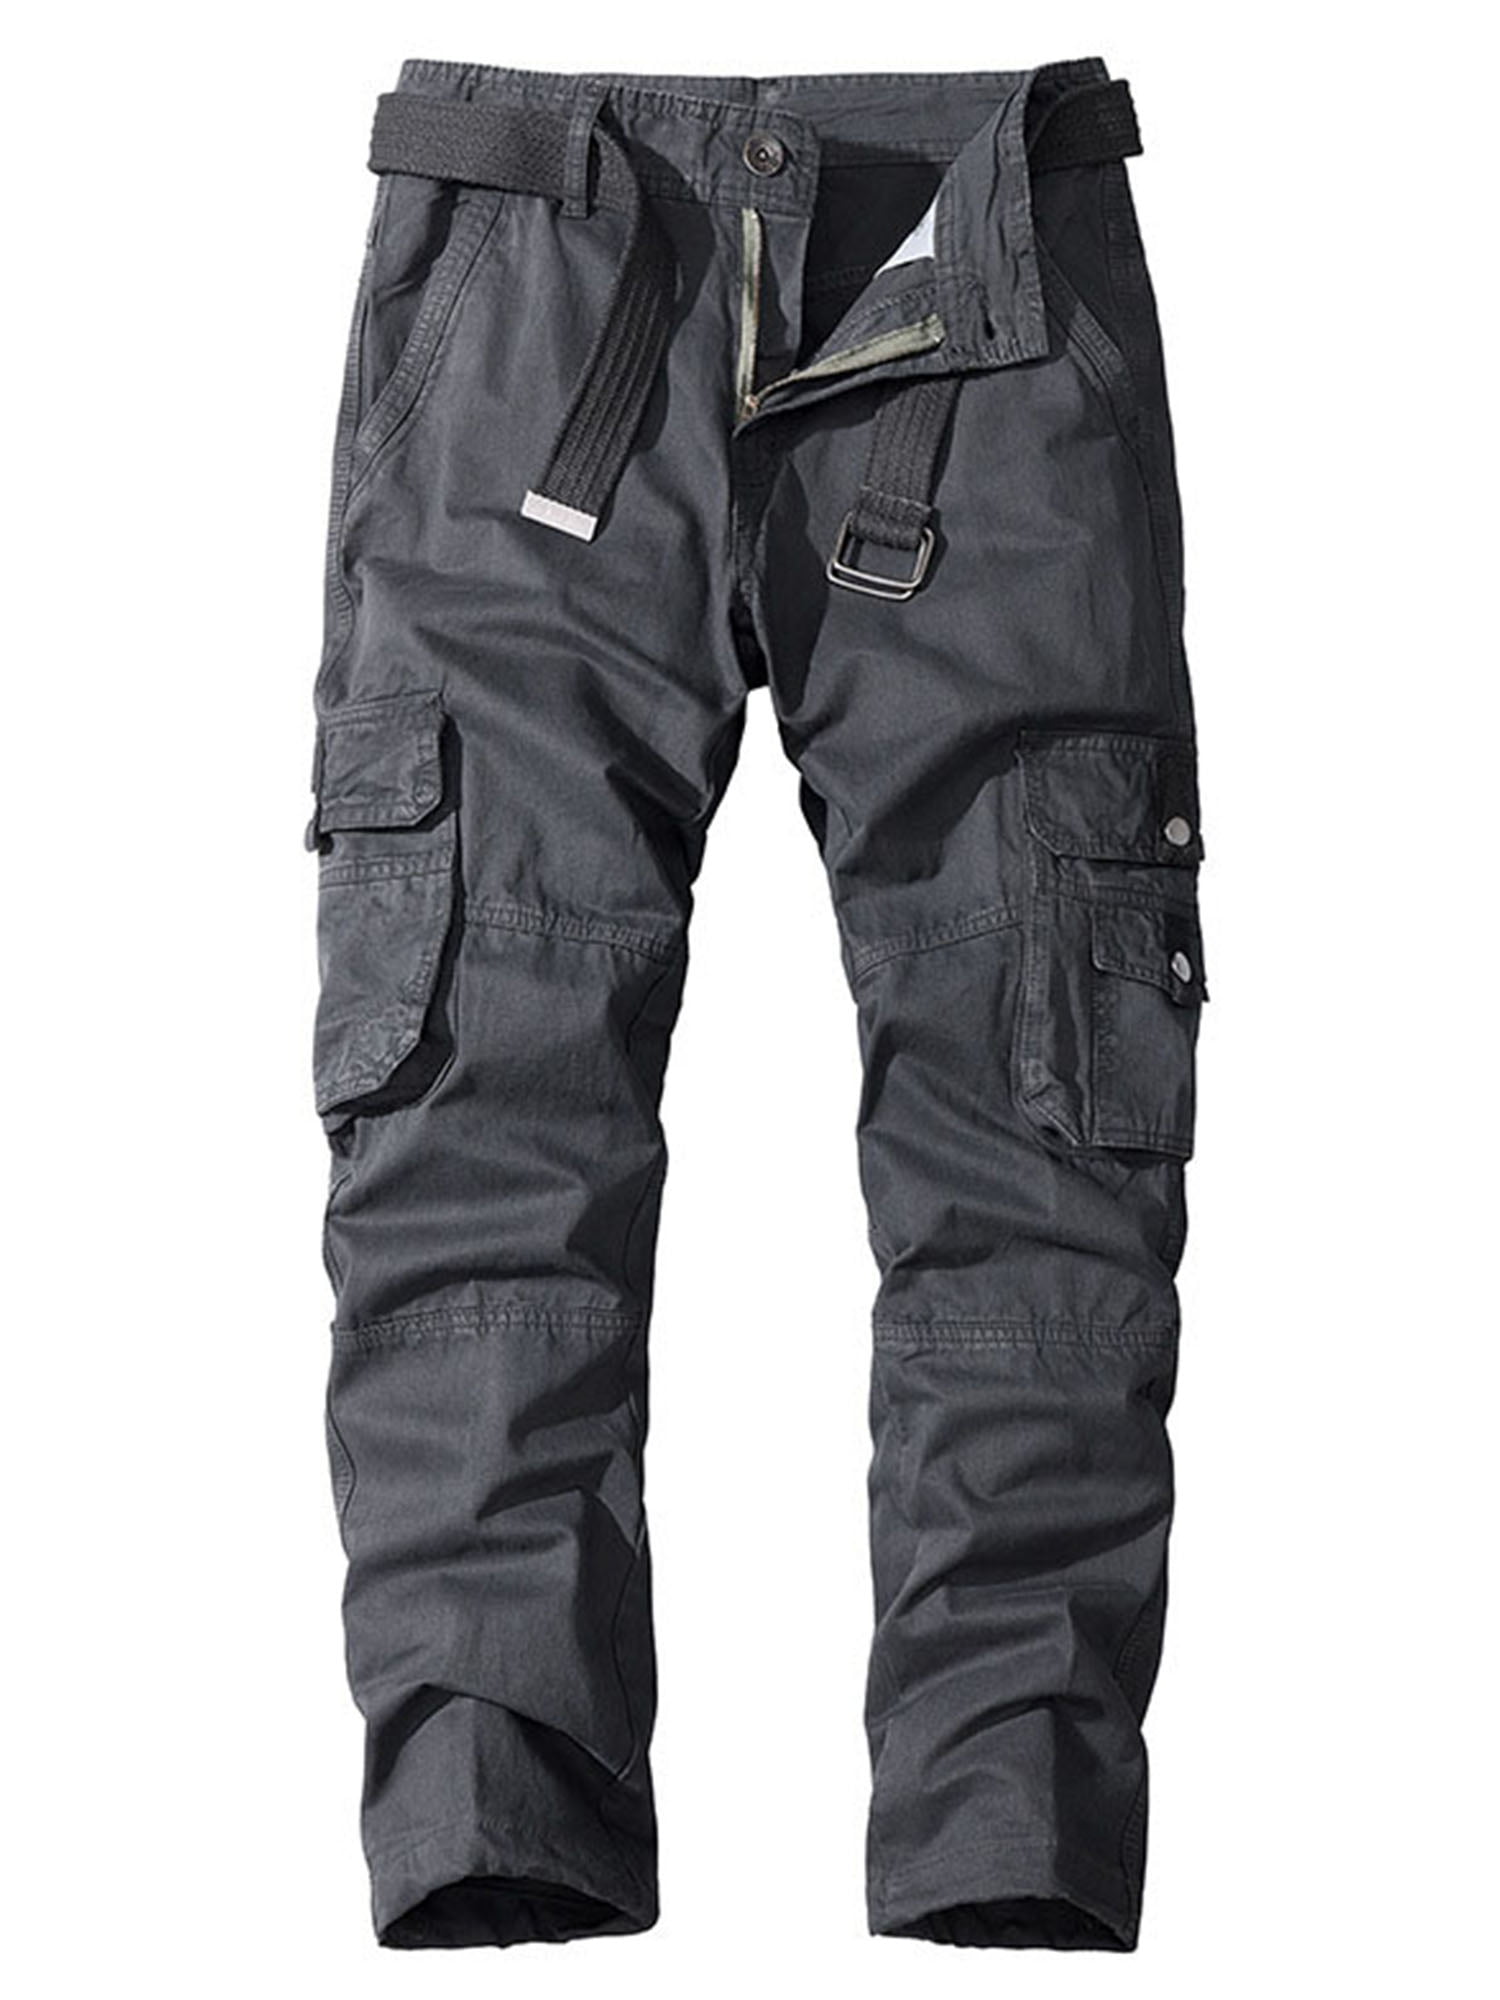 NEW Outdoor Mens Leisure Straight Overalls Pocket Pants Cargo Combat Trousers 